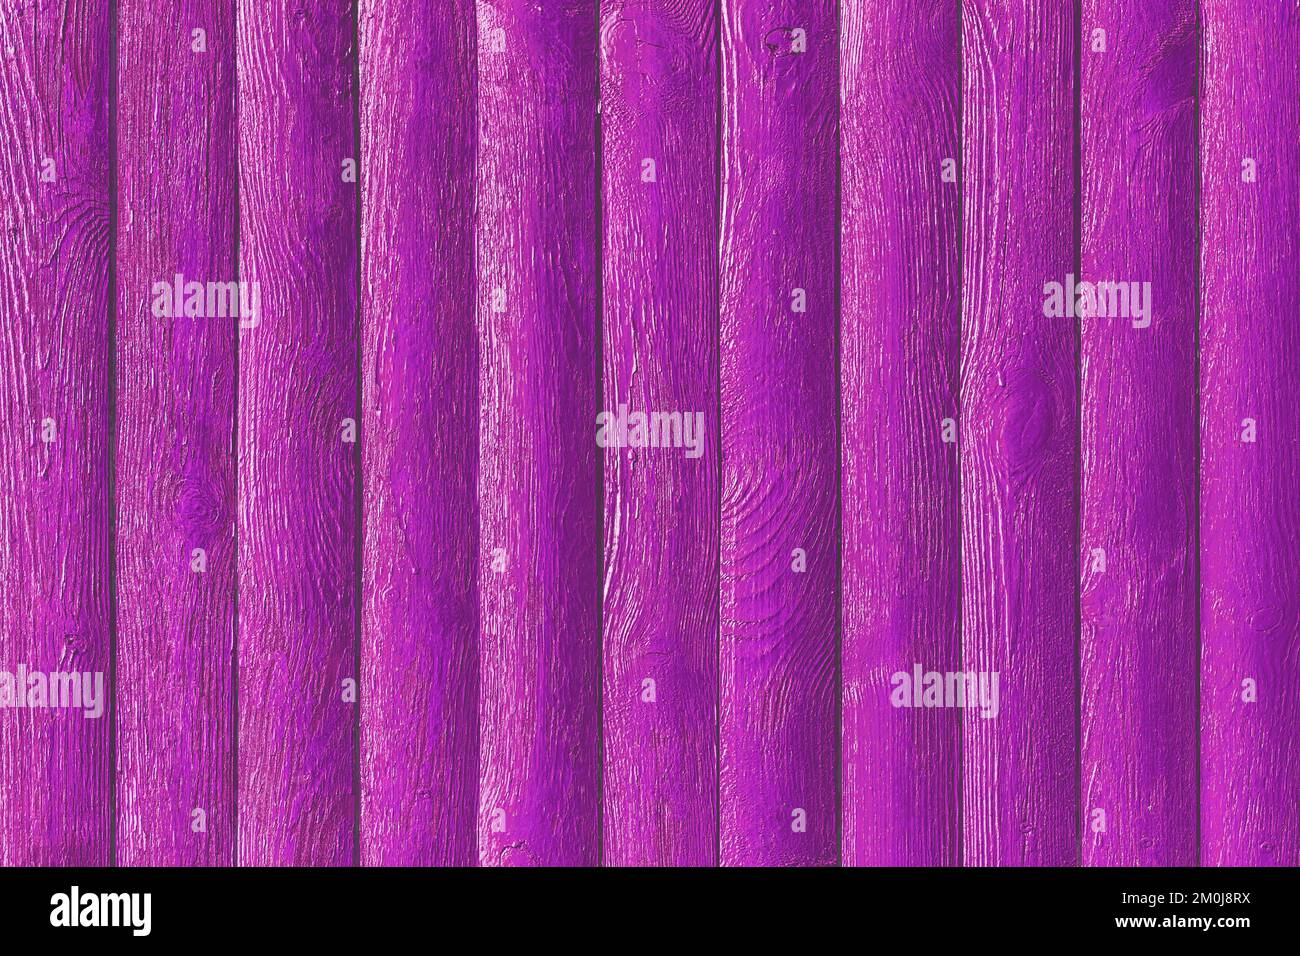 Pink purple paint fence boards surface wooden texture plank background. Stock Photo